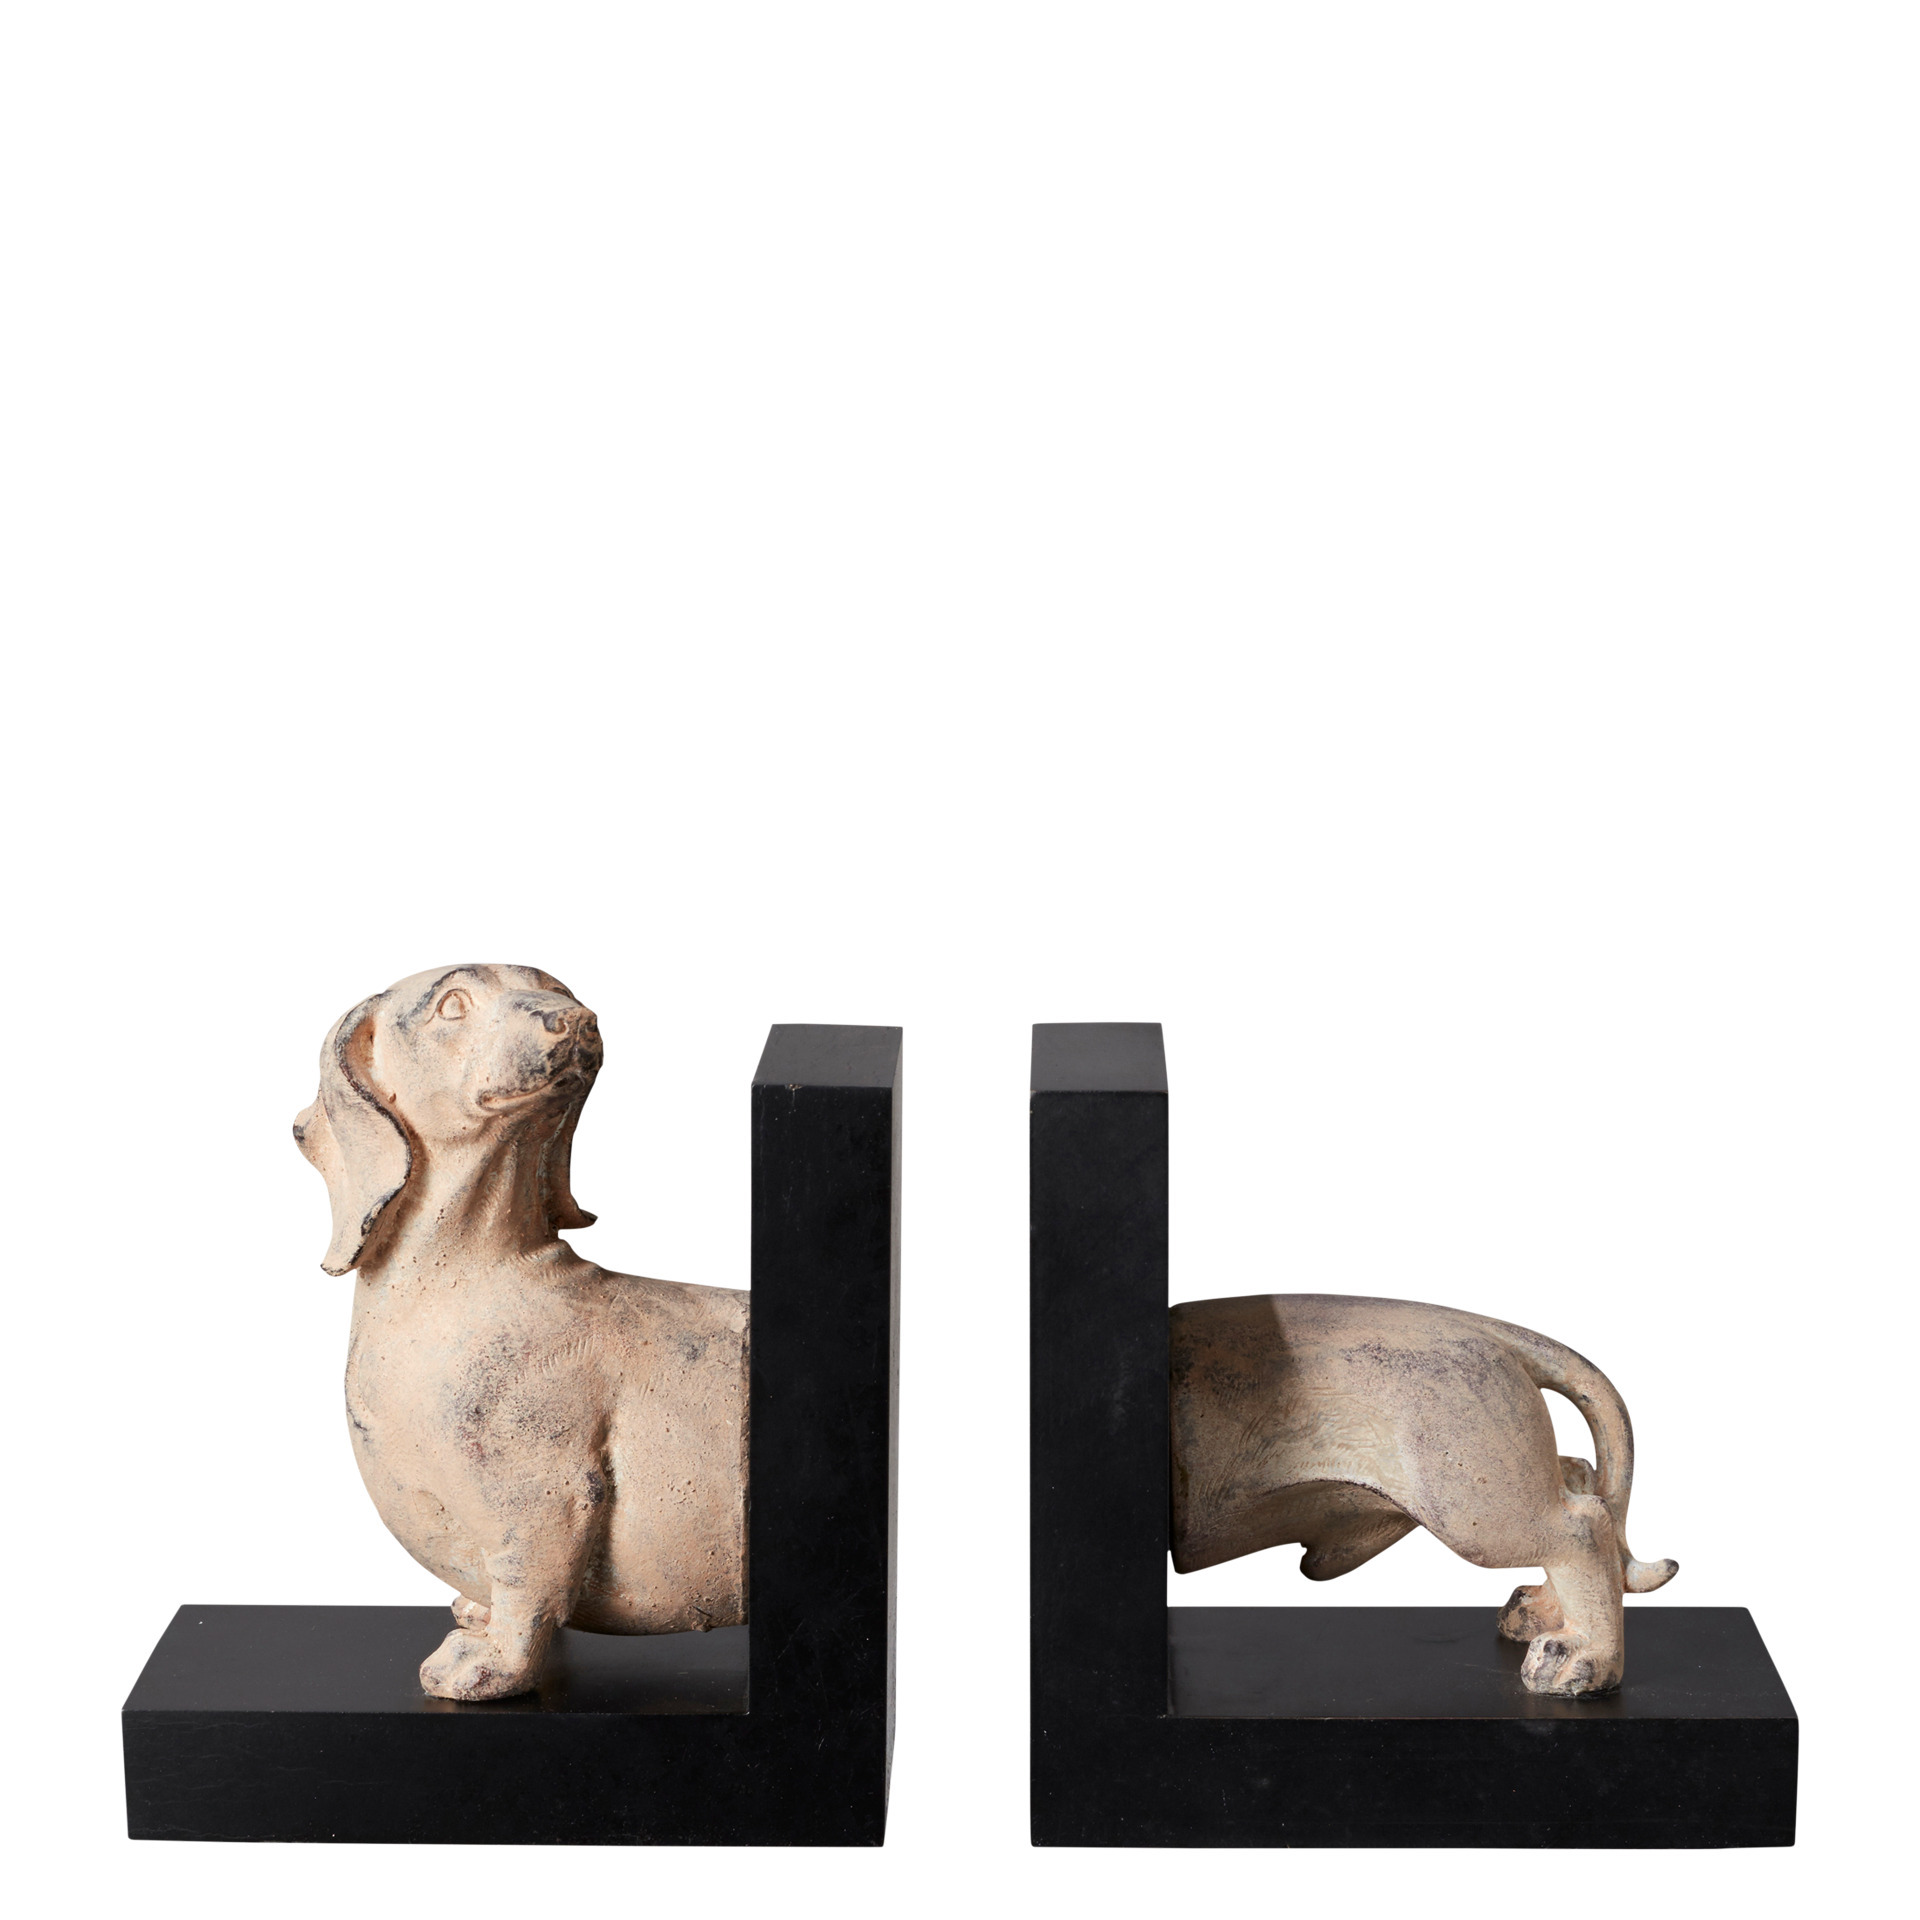 Dachshund Dog Bookends - Natural